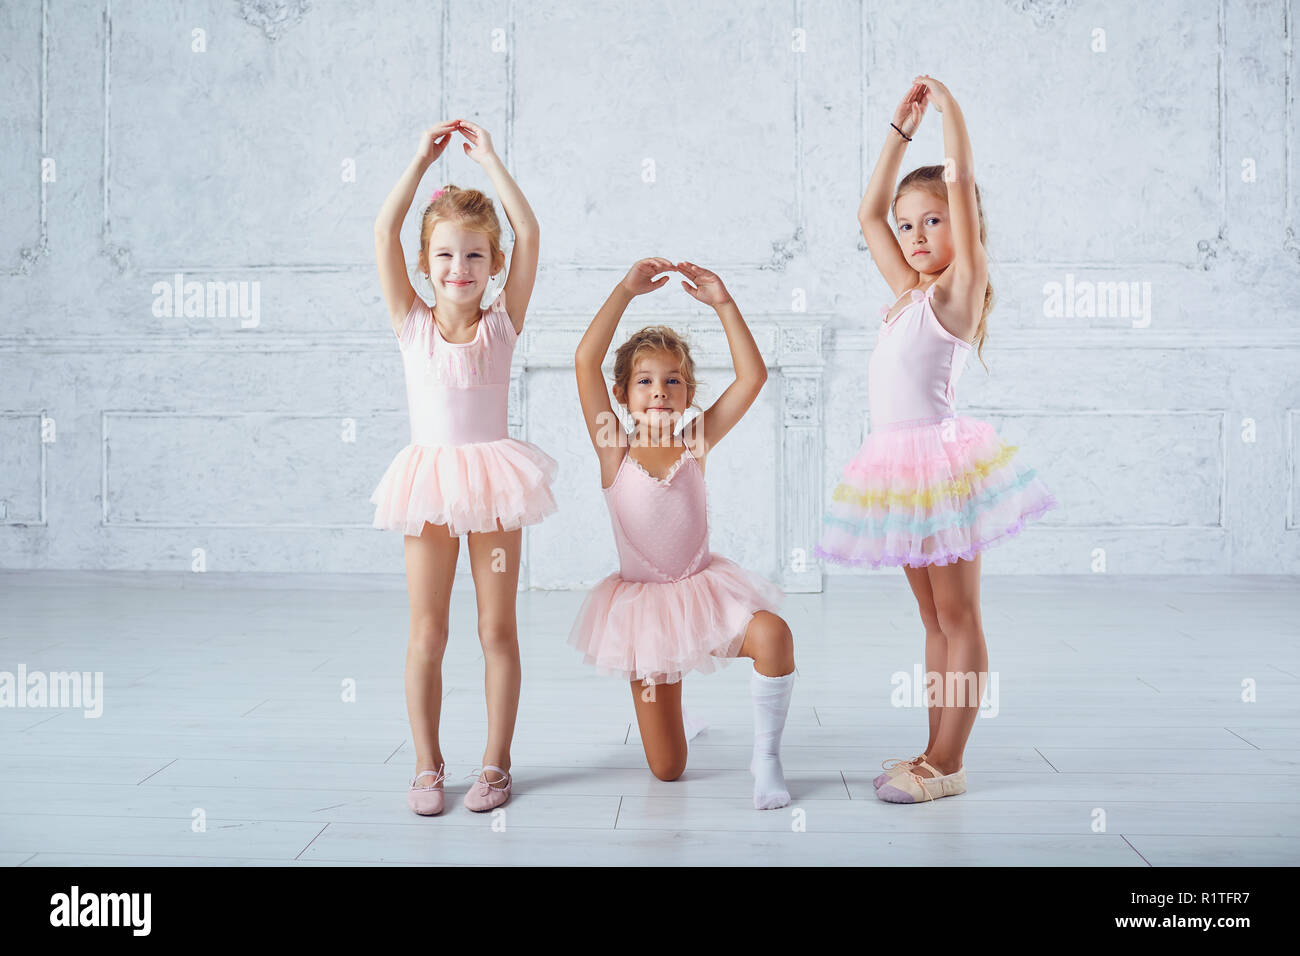 Children girls in ballerina costumes are engaged in dancing. Stock Photo